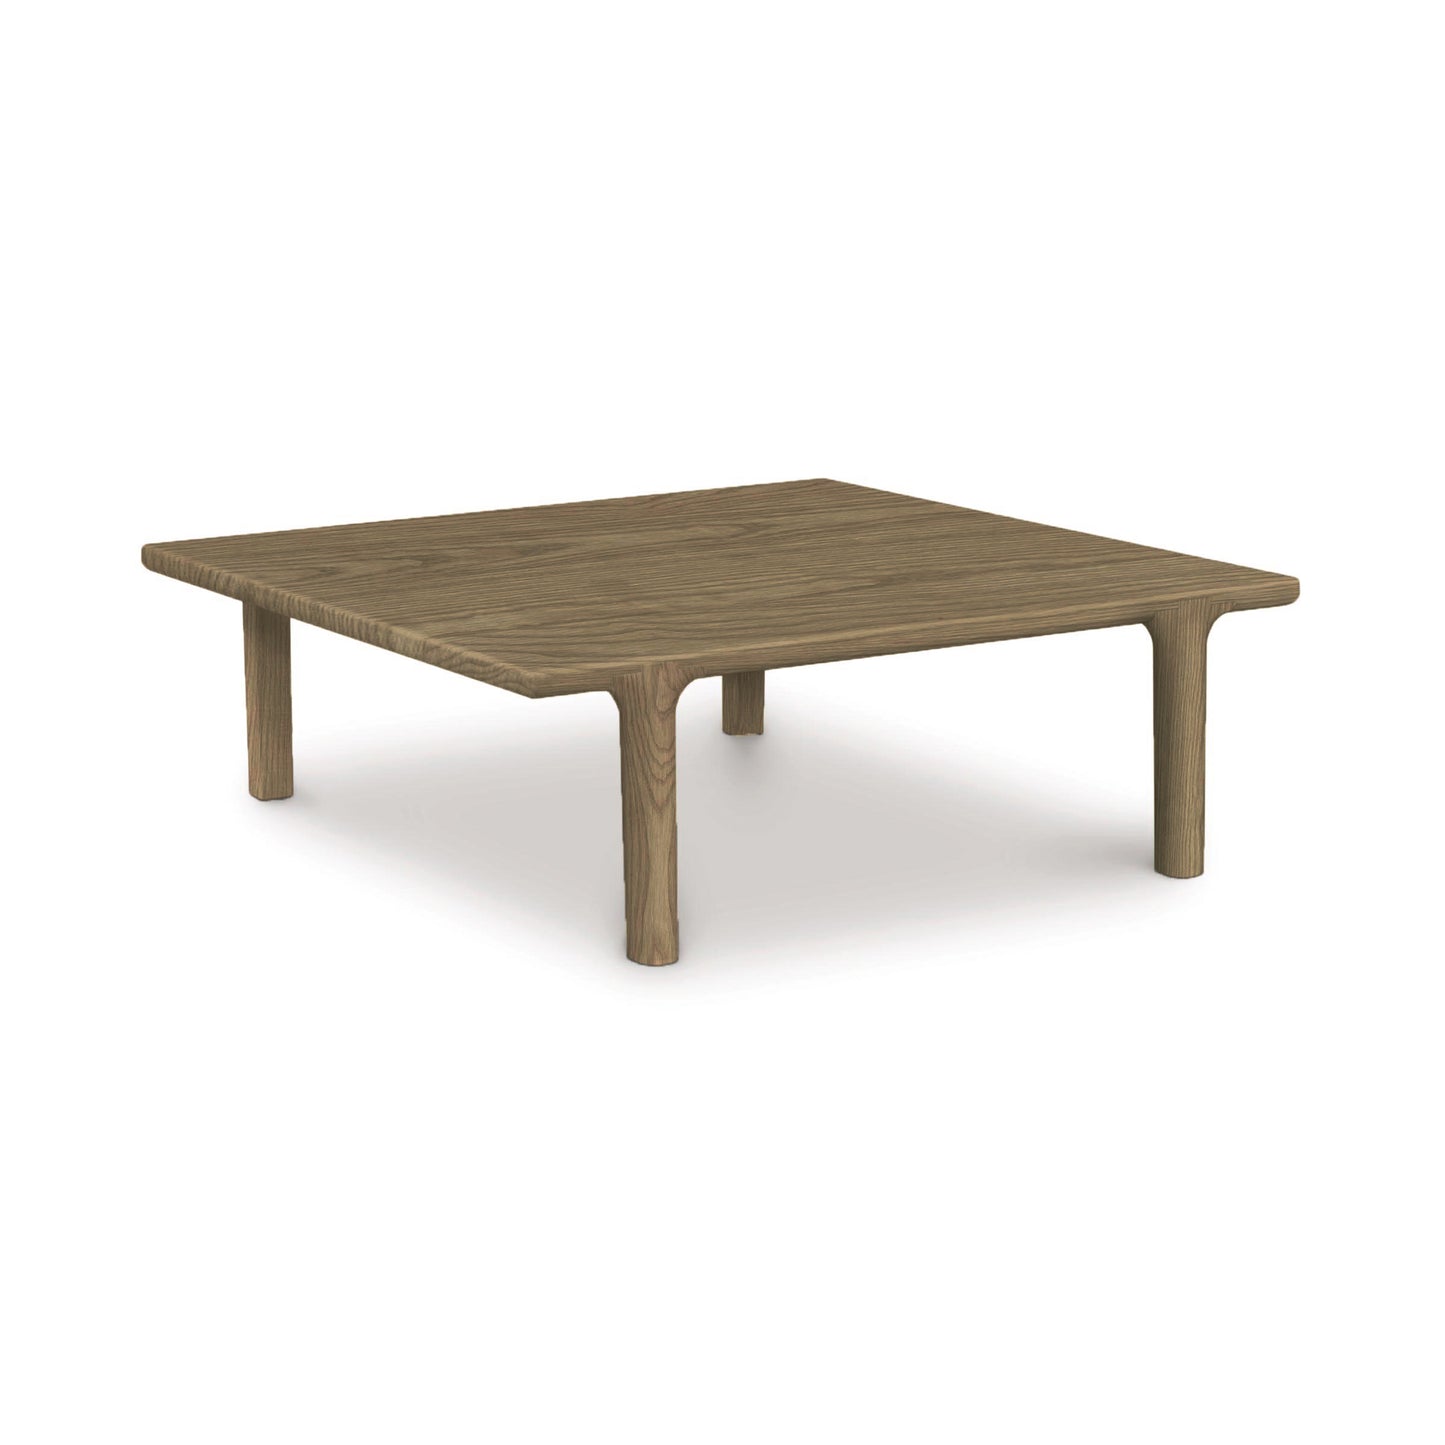 The Copeland Furniture Sierra Square Coffee Table, a contemporary design, is showcased on a white background.